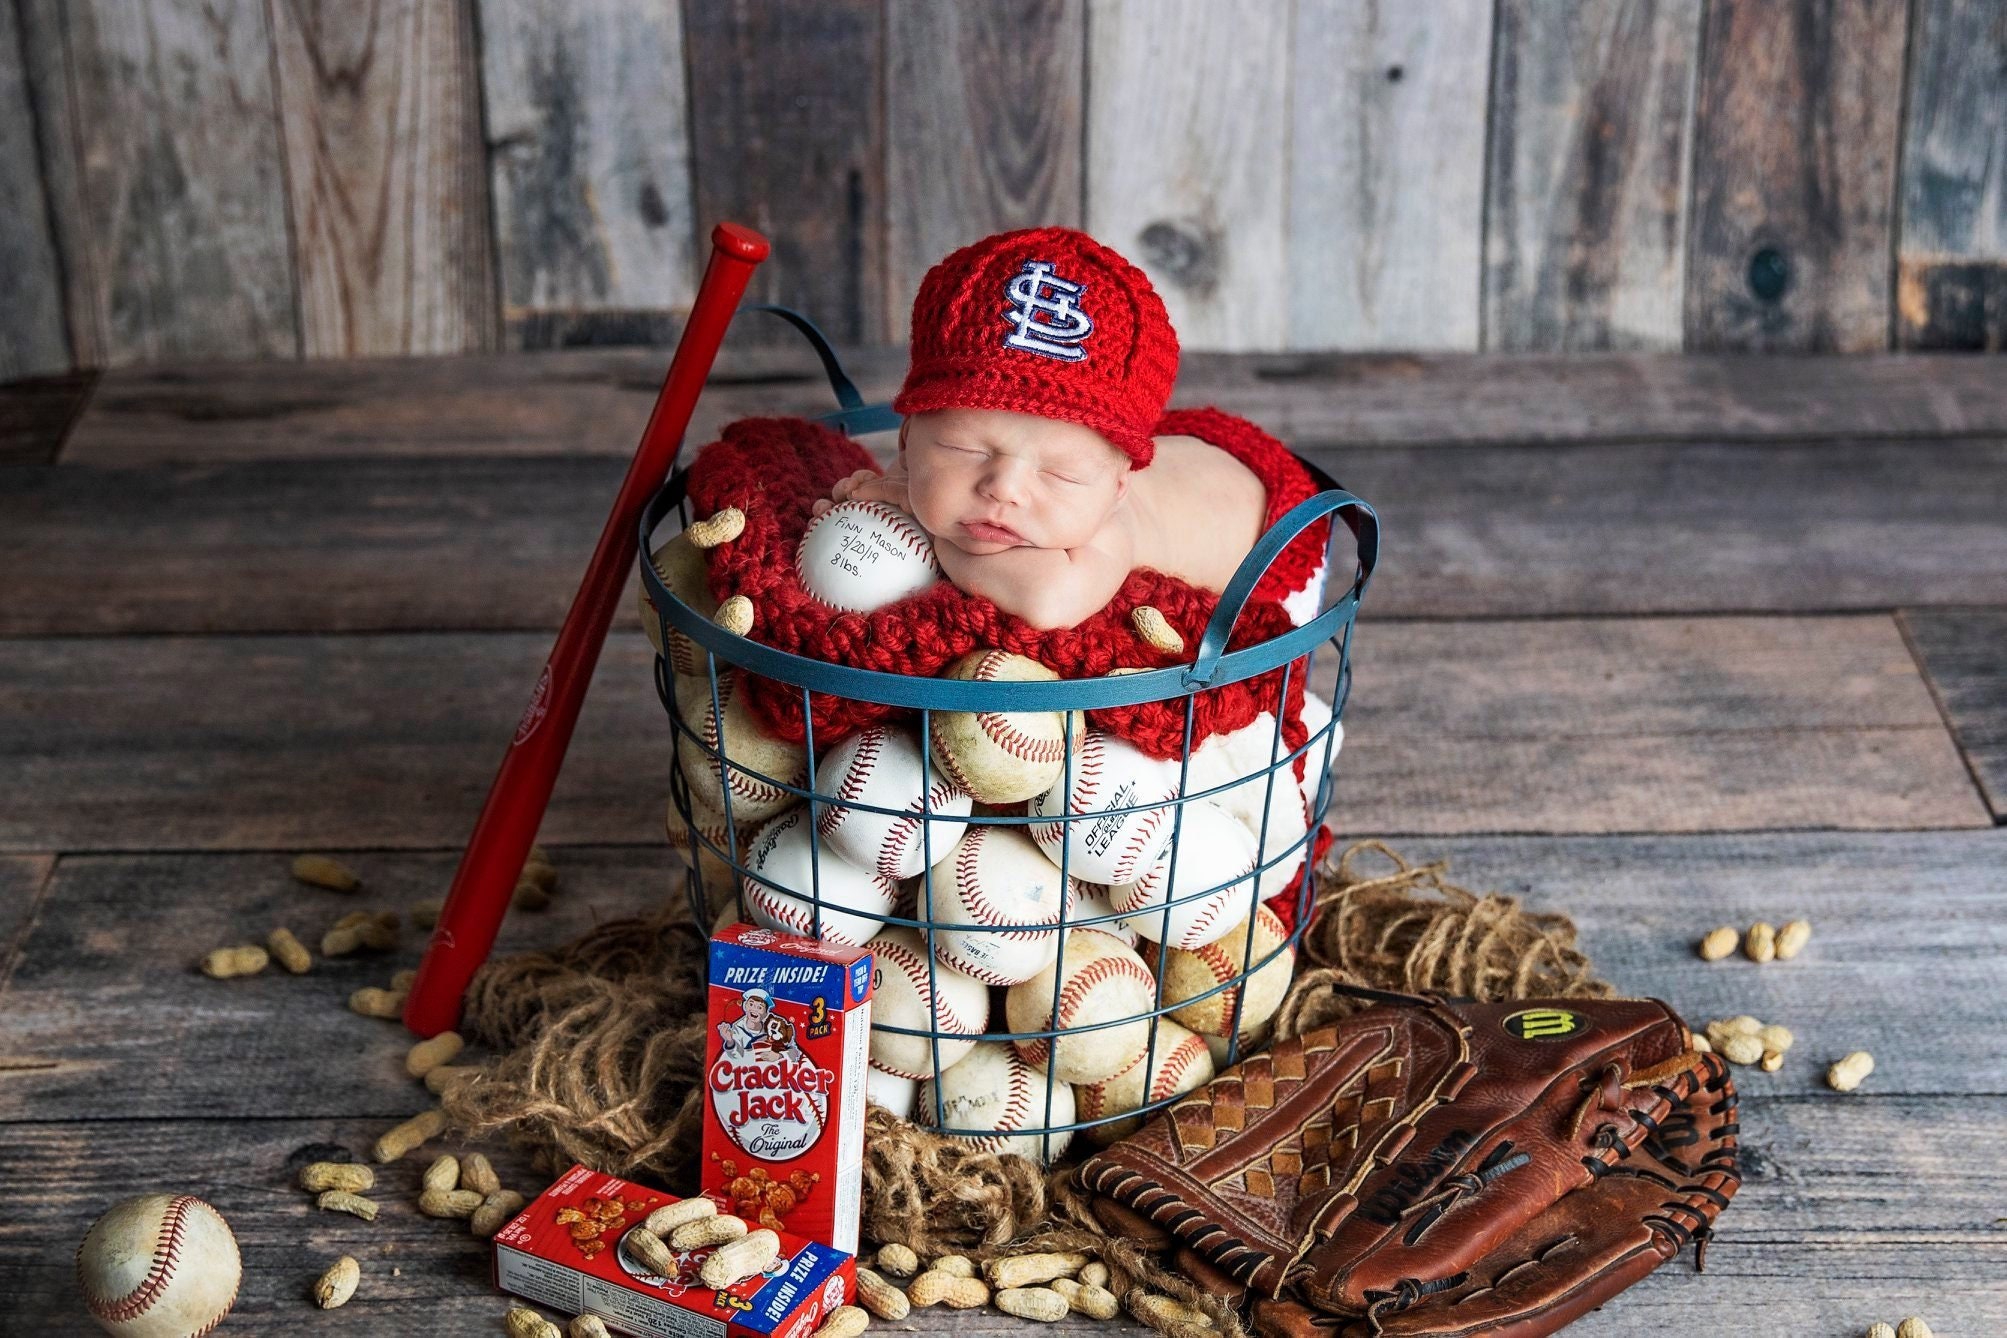 St. Louis Cardinals Baby Girl Baseball Cap for the Sports Fan